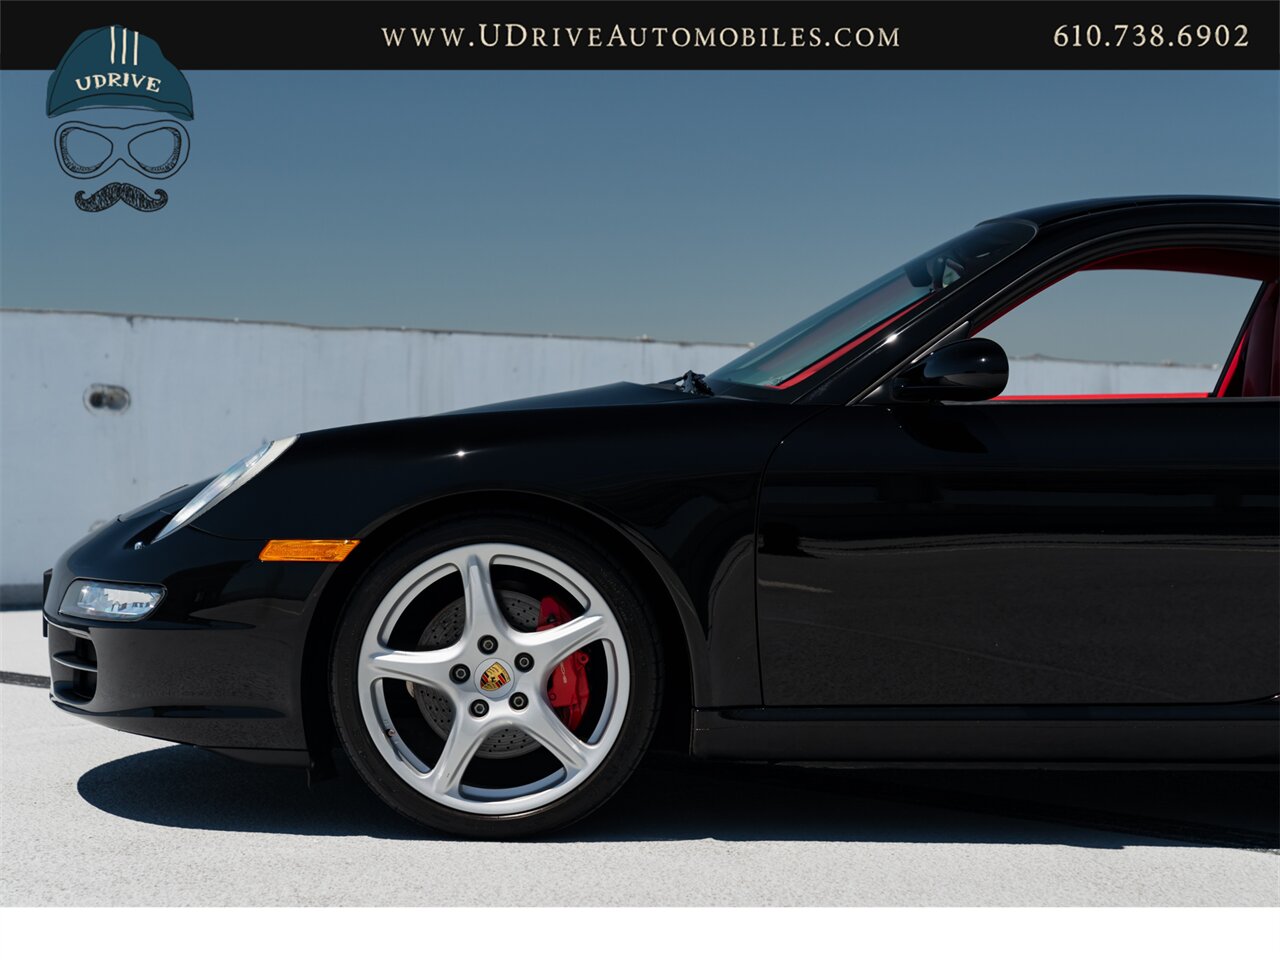 2005 Porsche 911 Carrera 911S 997 6 Speed 13k Miles Chrono  Leather to Sample Boxster Red/Blk Service History - Photo 10 - West Chester, PA 19382